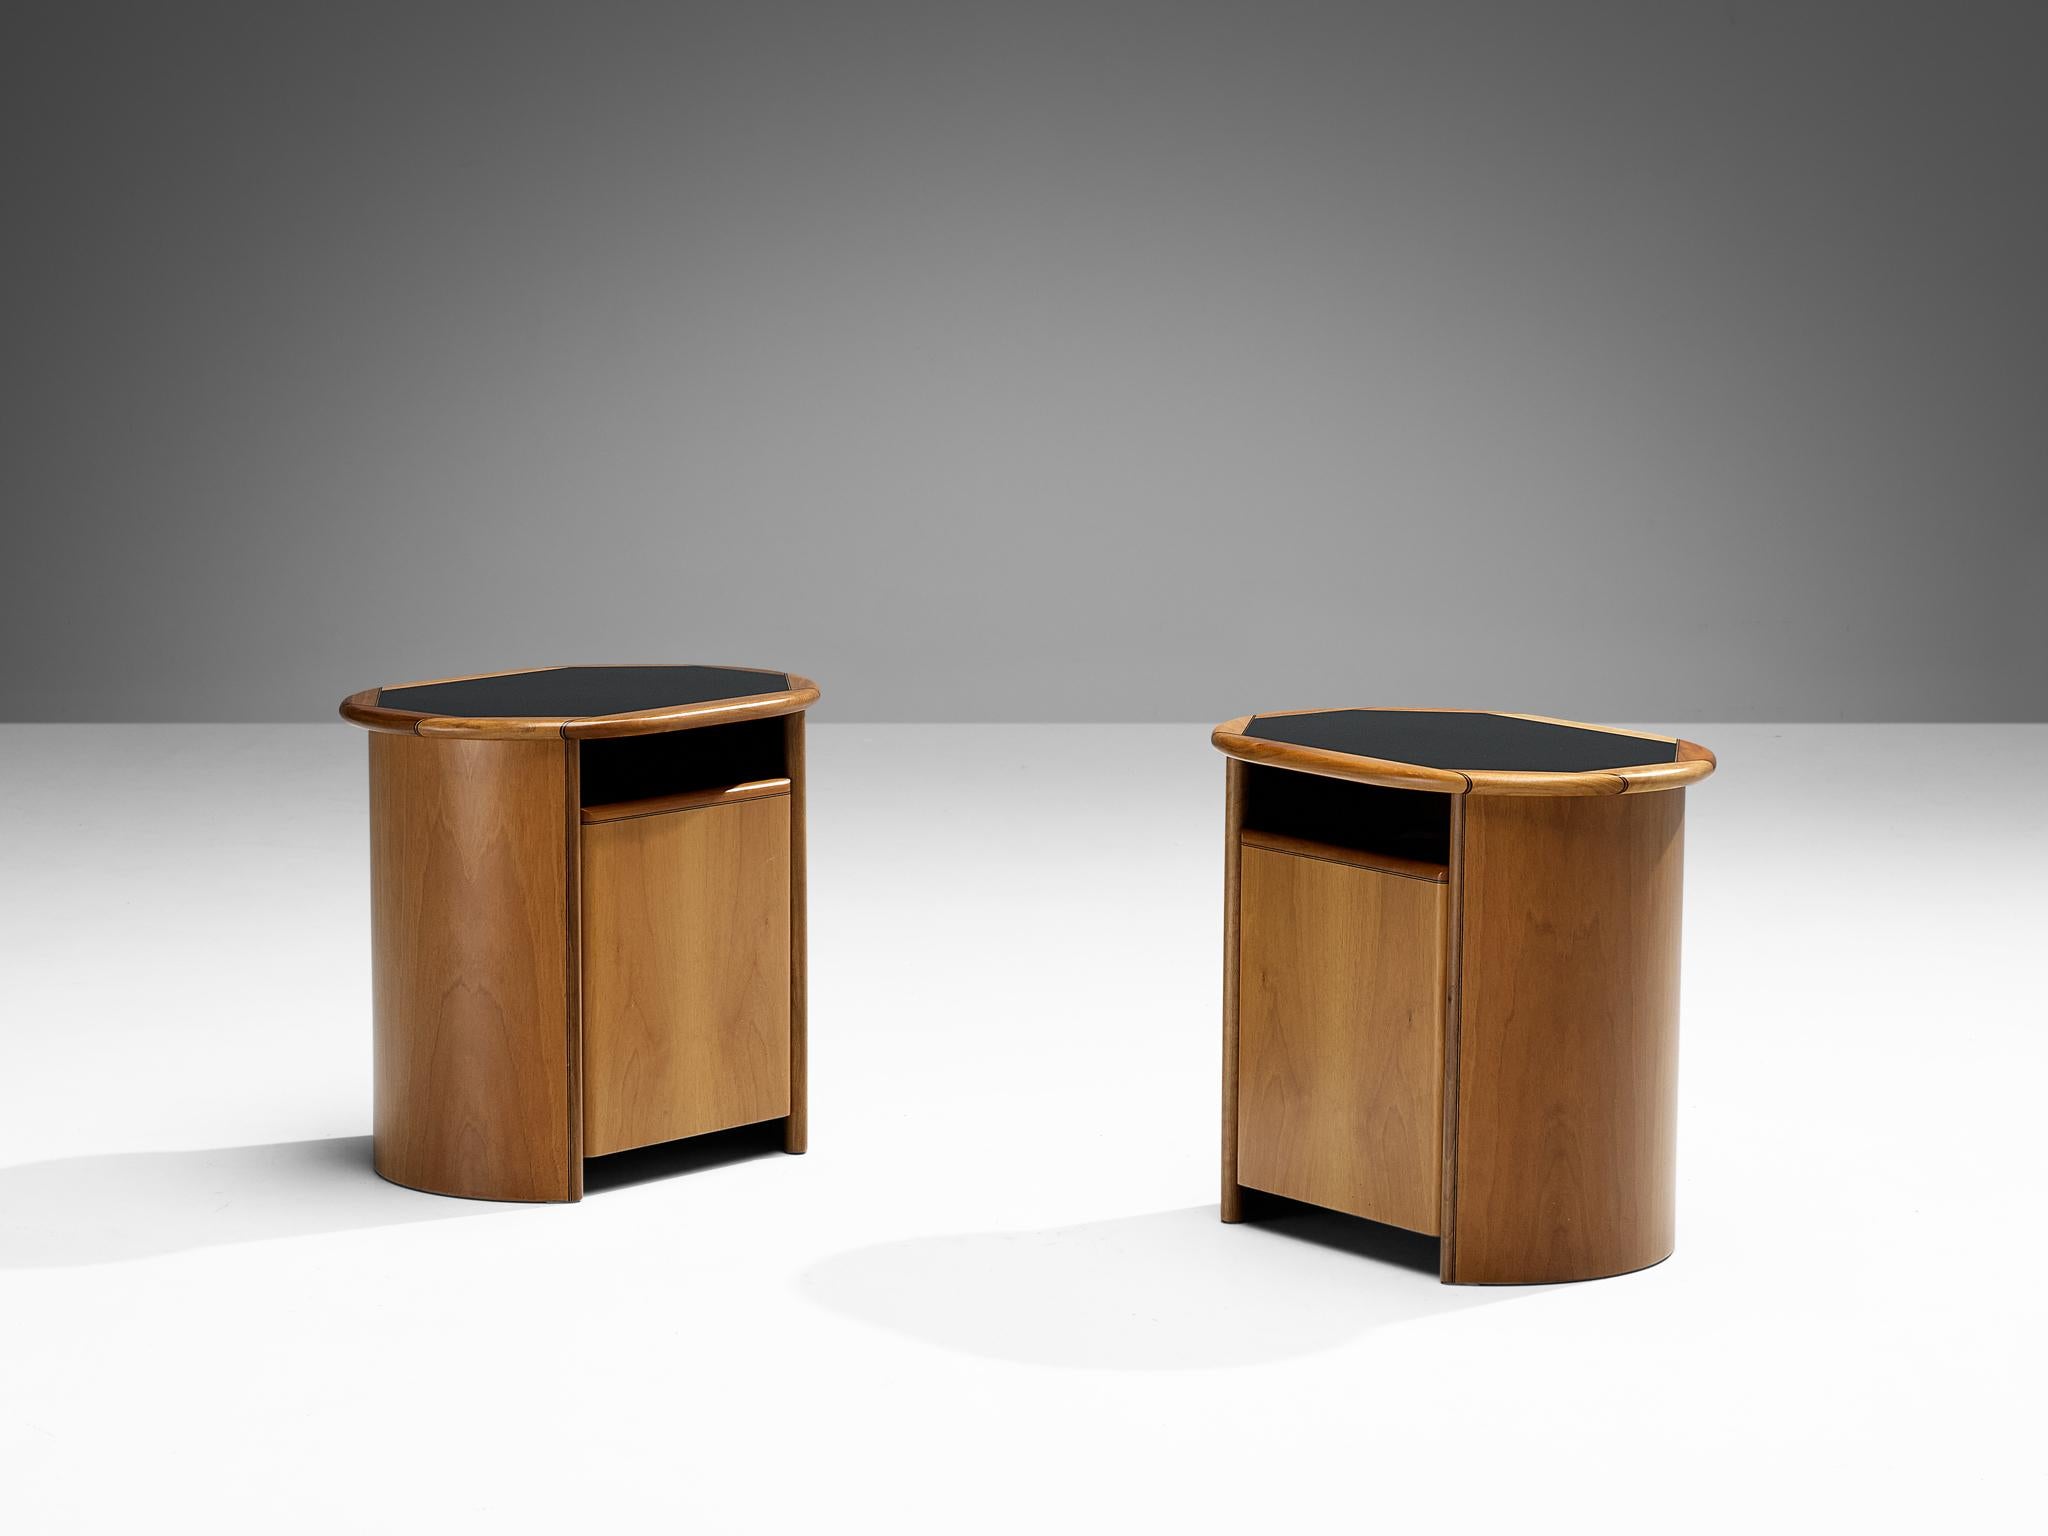 Afra & Tobia Scarpa for Maxalto, pair of bedside tables or cabinets model ‘Artona’, walnut, ebony, Italy, 1975/1979

This pair of night stands was designed by Afra & Tobia Scarpa within the ‘Artona’ line for Maxalto. This particular model is rare.